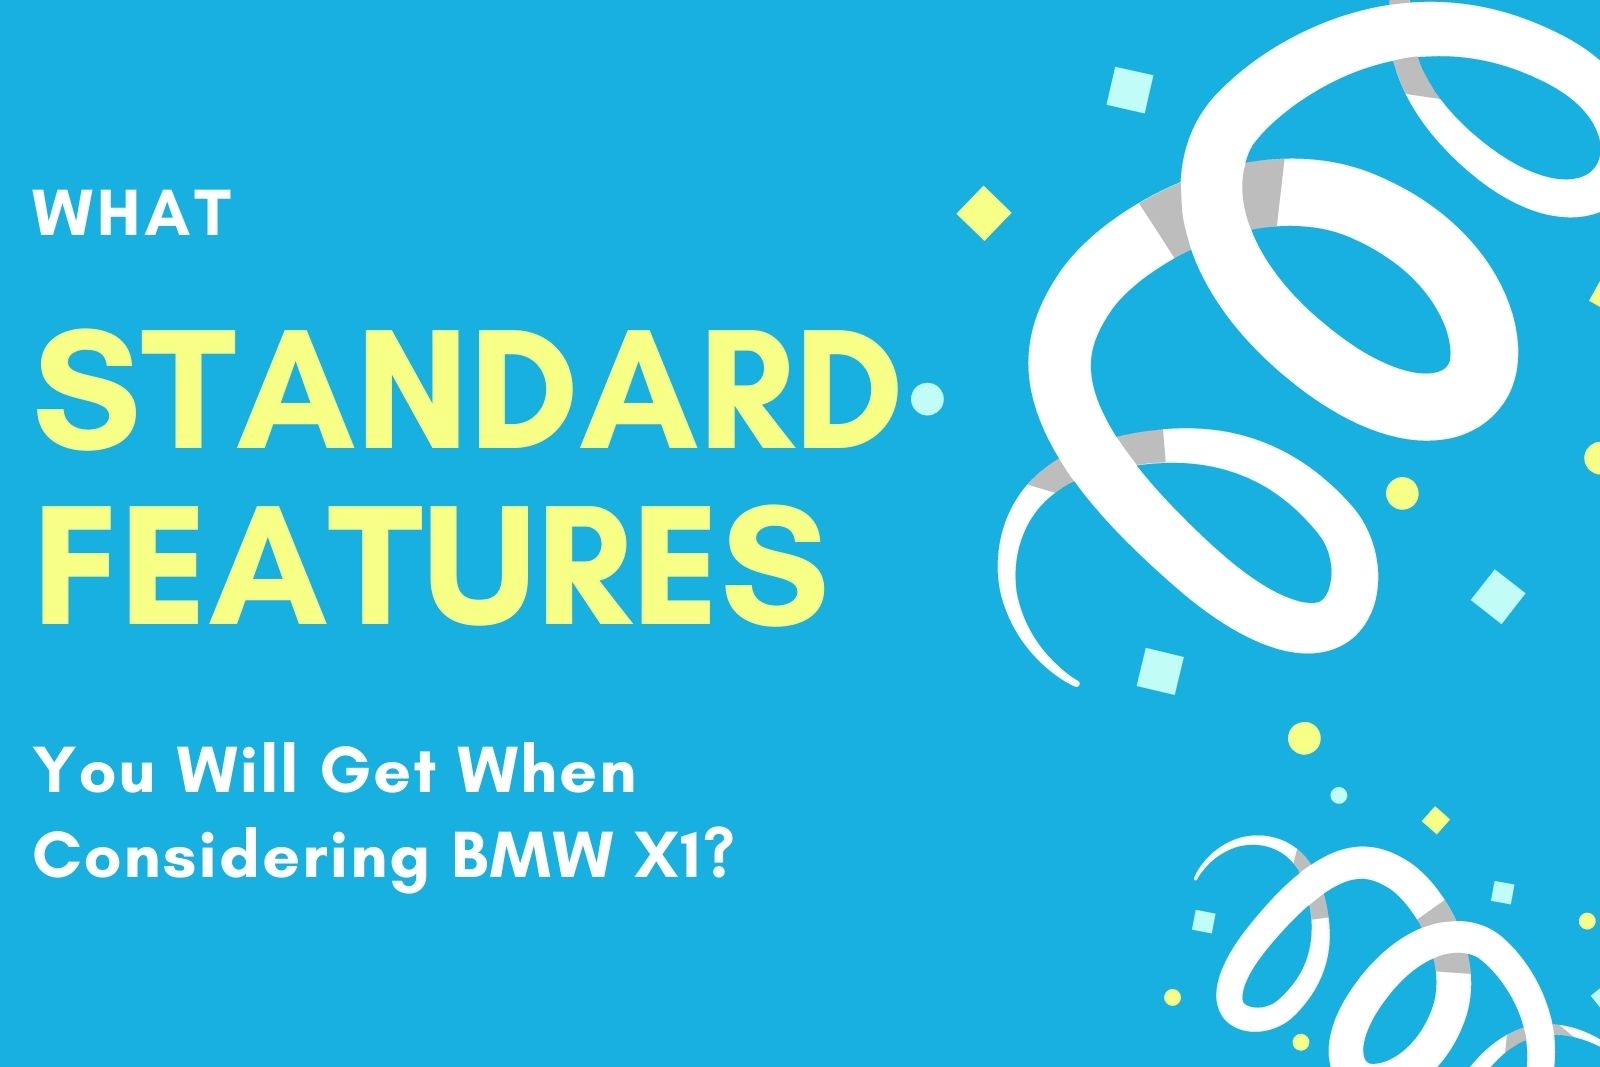 What Standard Features You Can Get If Consider BMW X1?